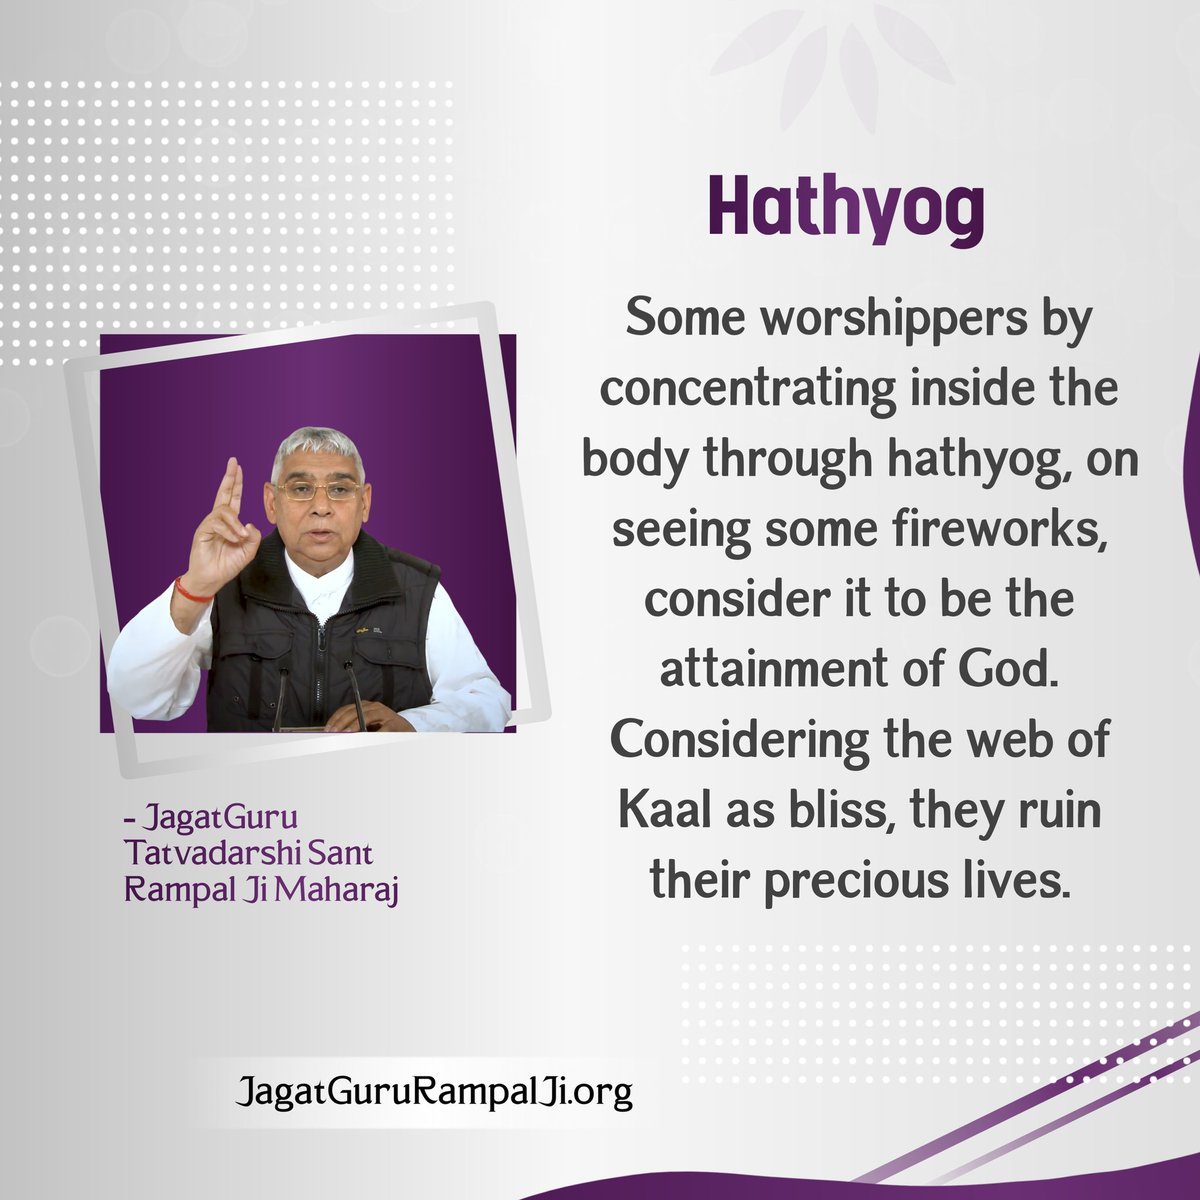 HATHYOG Some worshippers by concentrating inside the body through hathyog, on seeing some fireworks, consider it to be the attainment of God. Considering the web of Kaal as bliss, they ruin their precious lives. Must Watch Sadhna tv7:30 PM #GodMorningTuesday